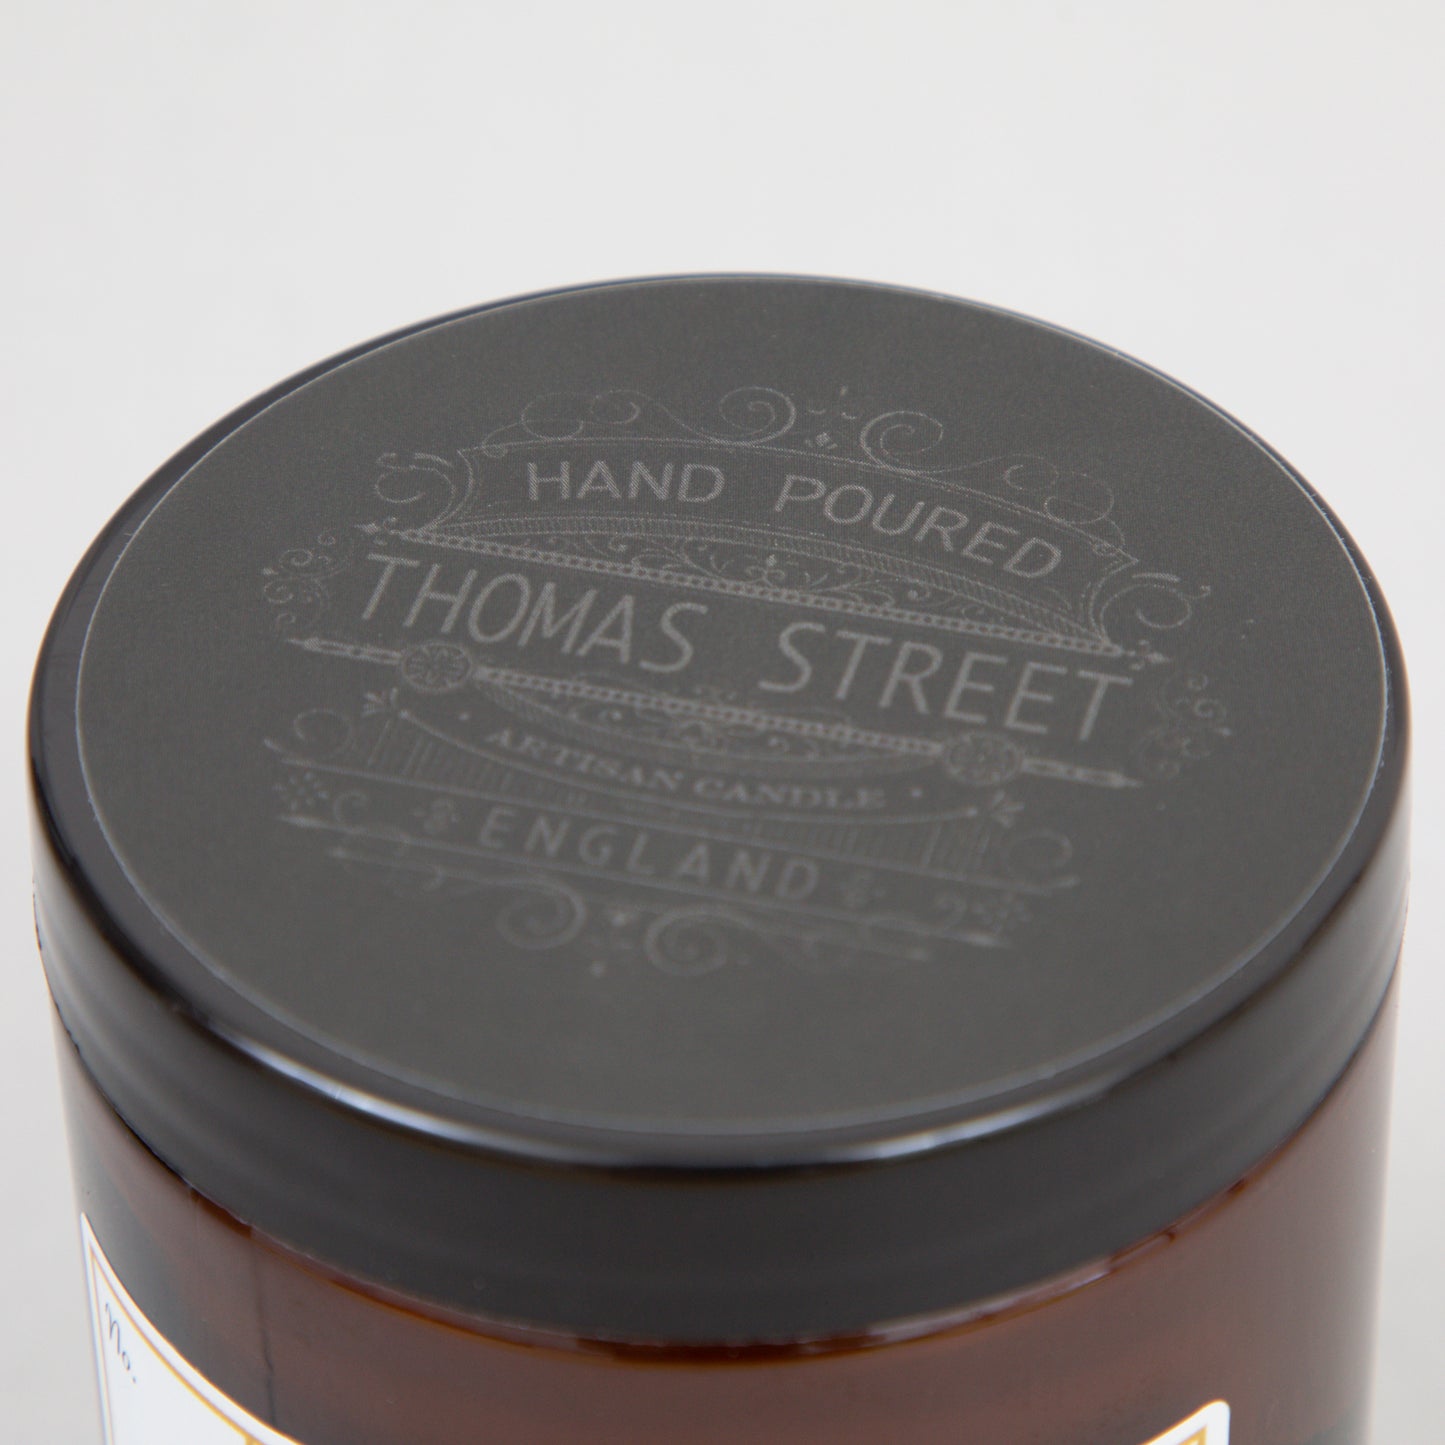 THOMAS STREET CANDLES #45 New Home Scented Candle (200g)